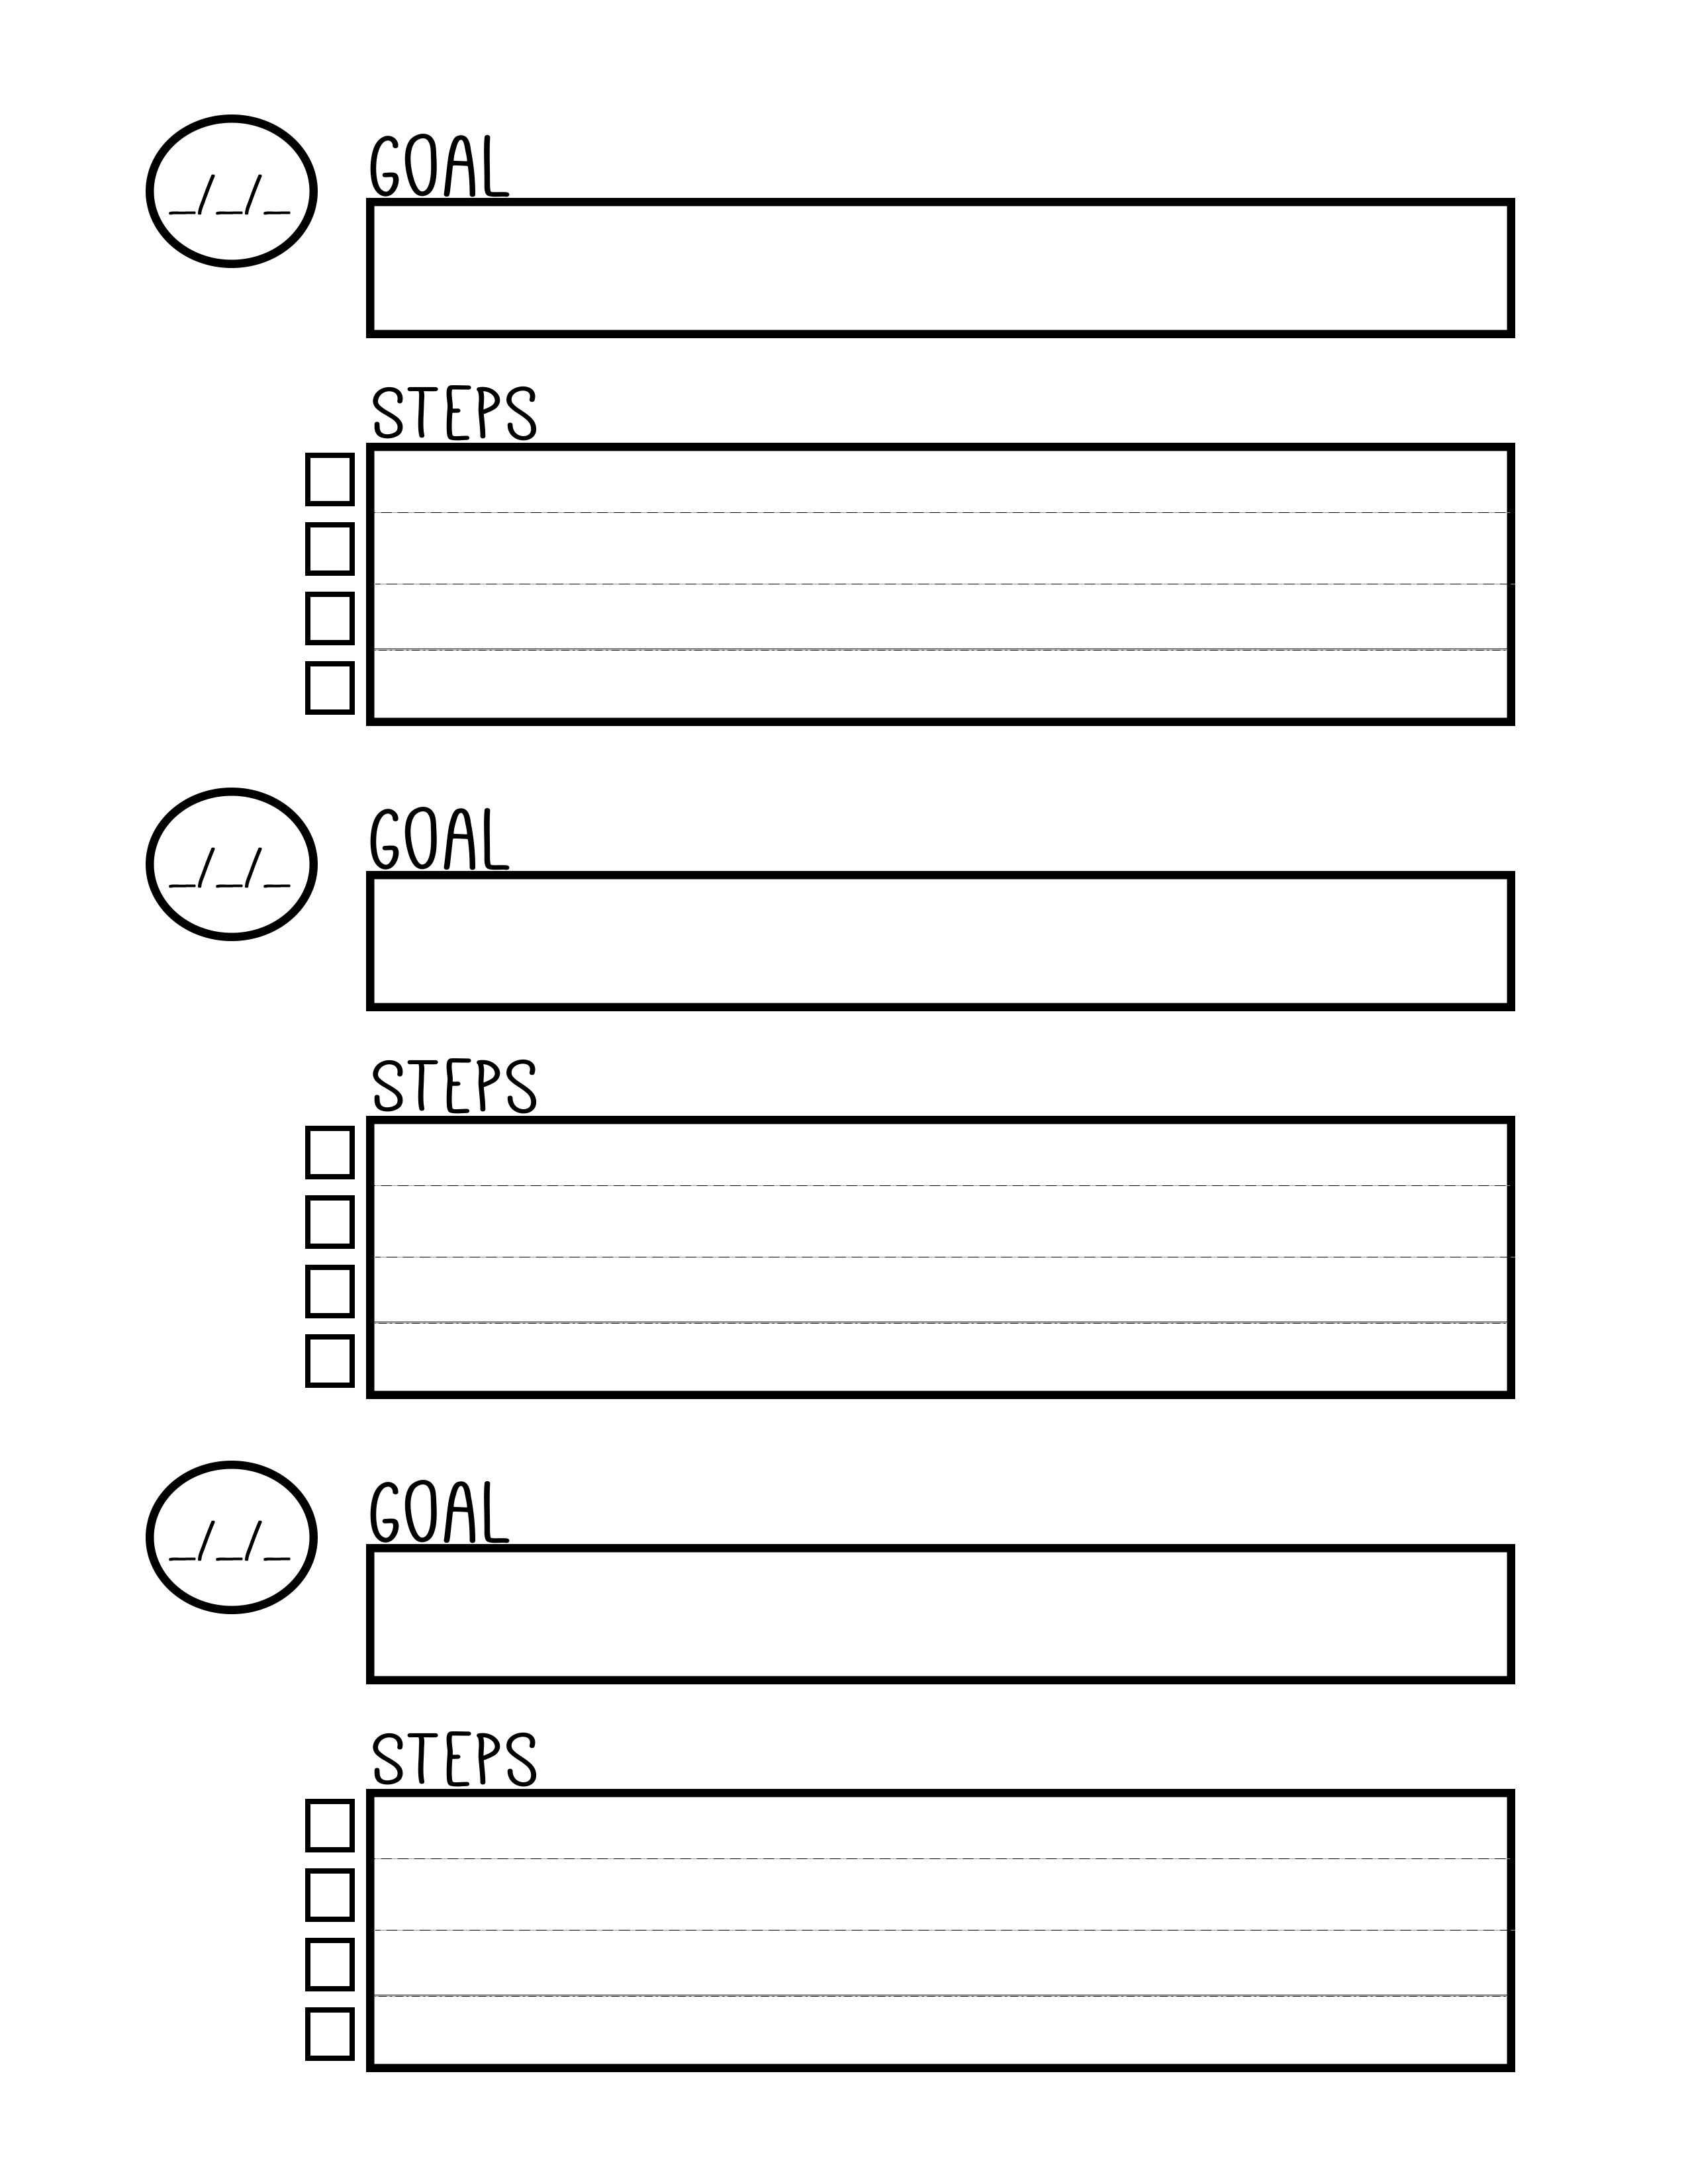 Dbt therapy Worksheets and Goal Setting Worksheet therapy Save Free Printable Goal Setting